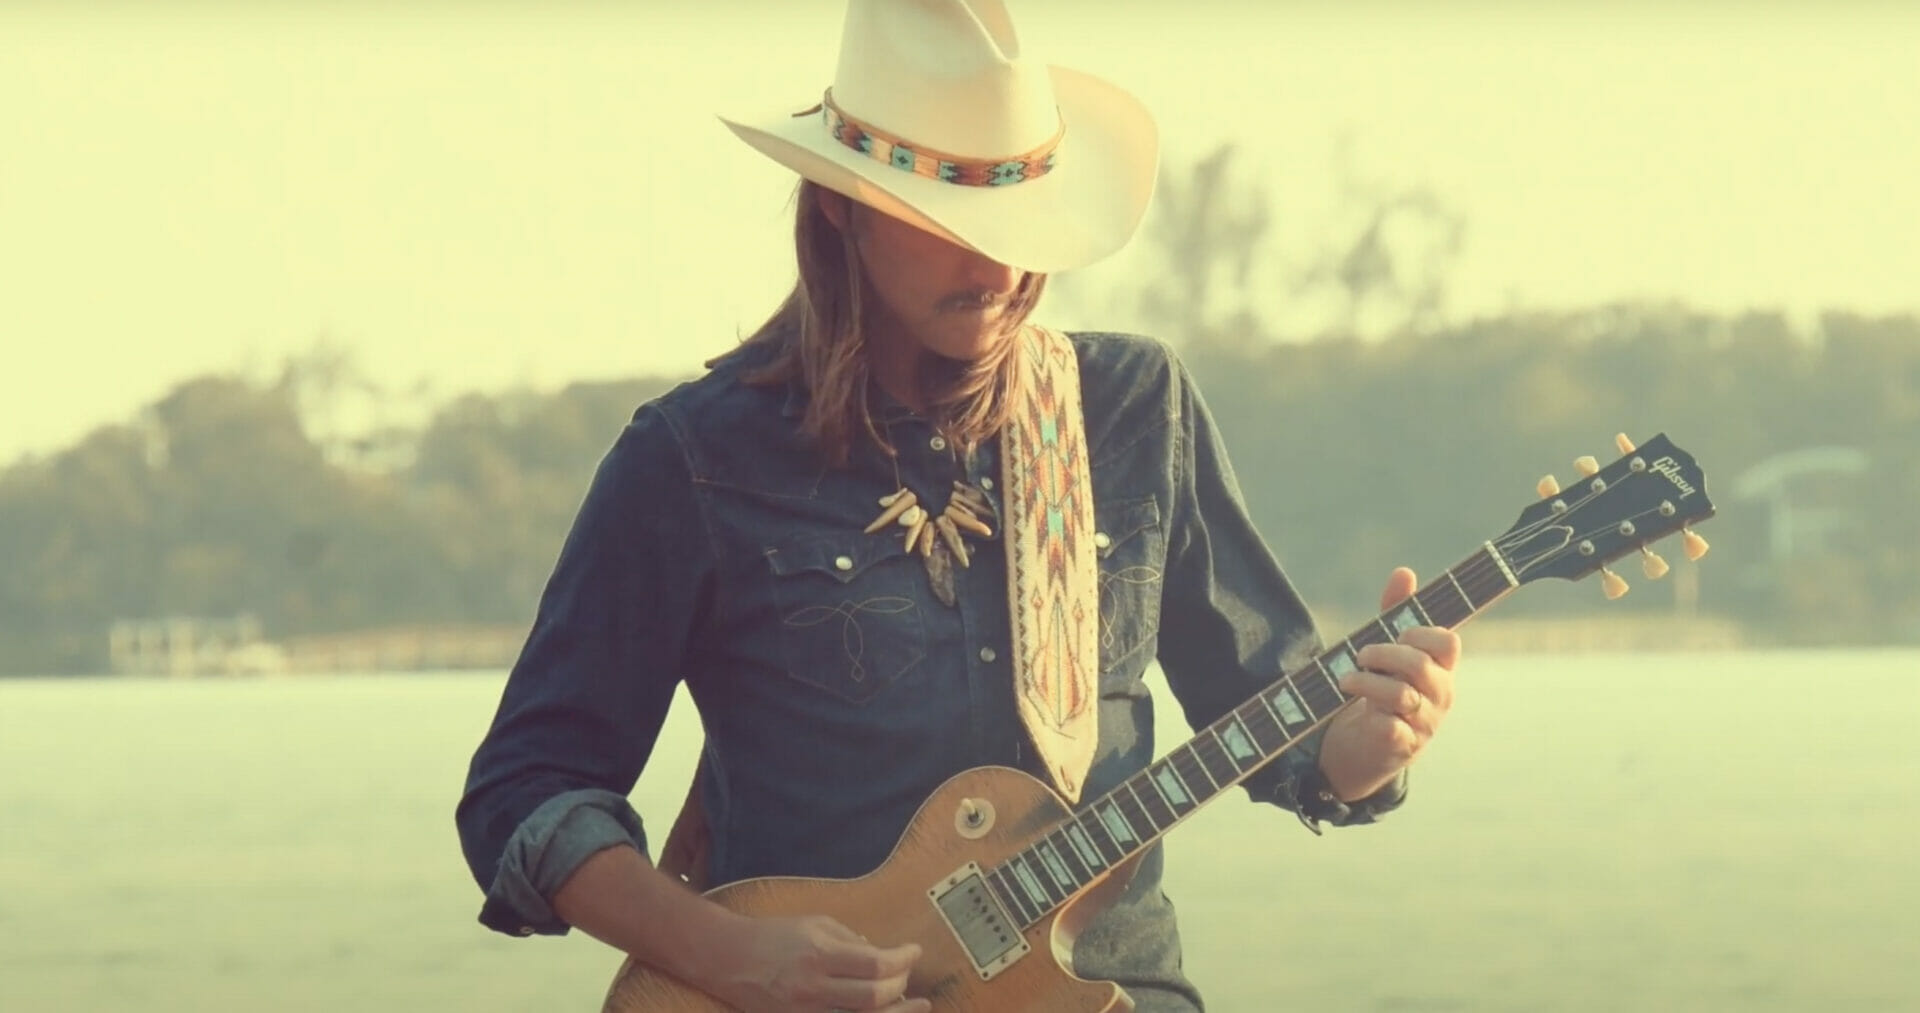 Video Premiere: Duane Betts Drops “Waiting On A Song” Music Video Ahead of Fall Tour